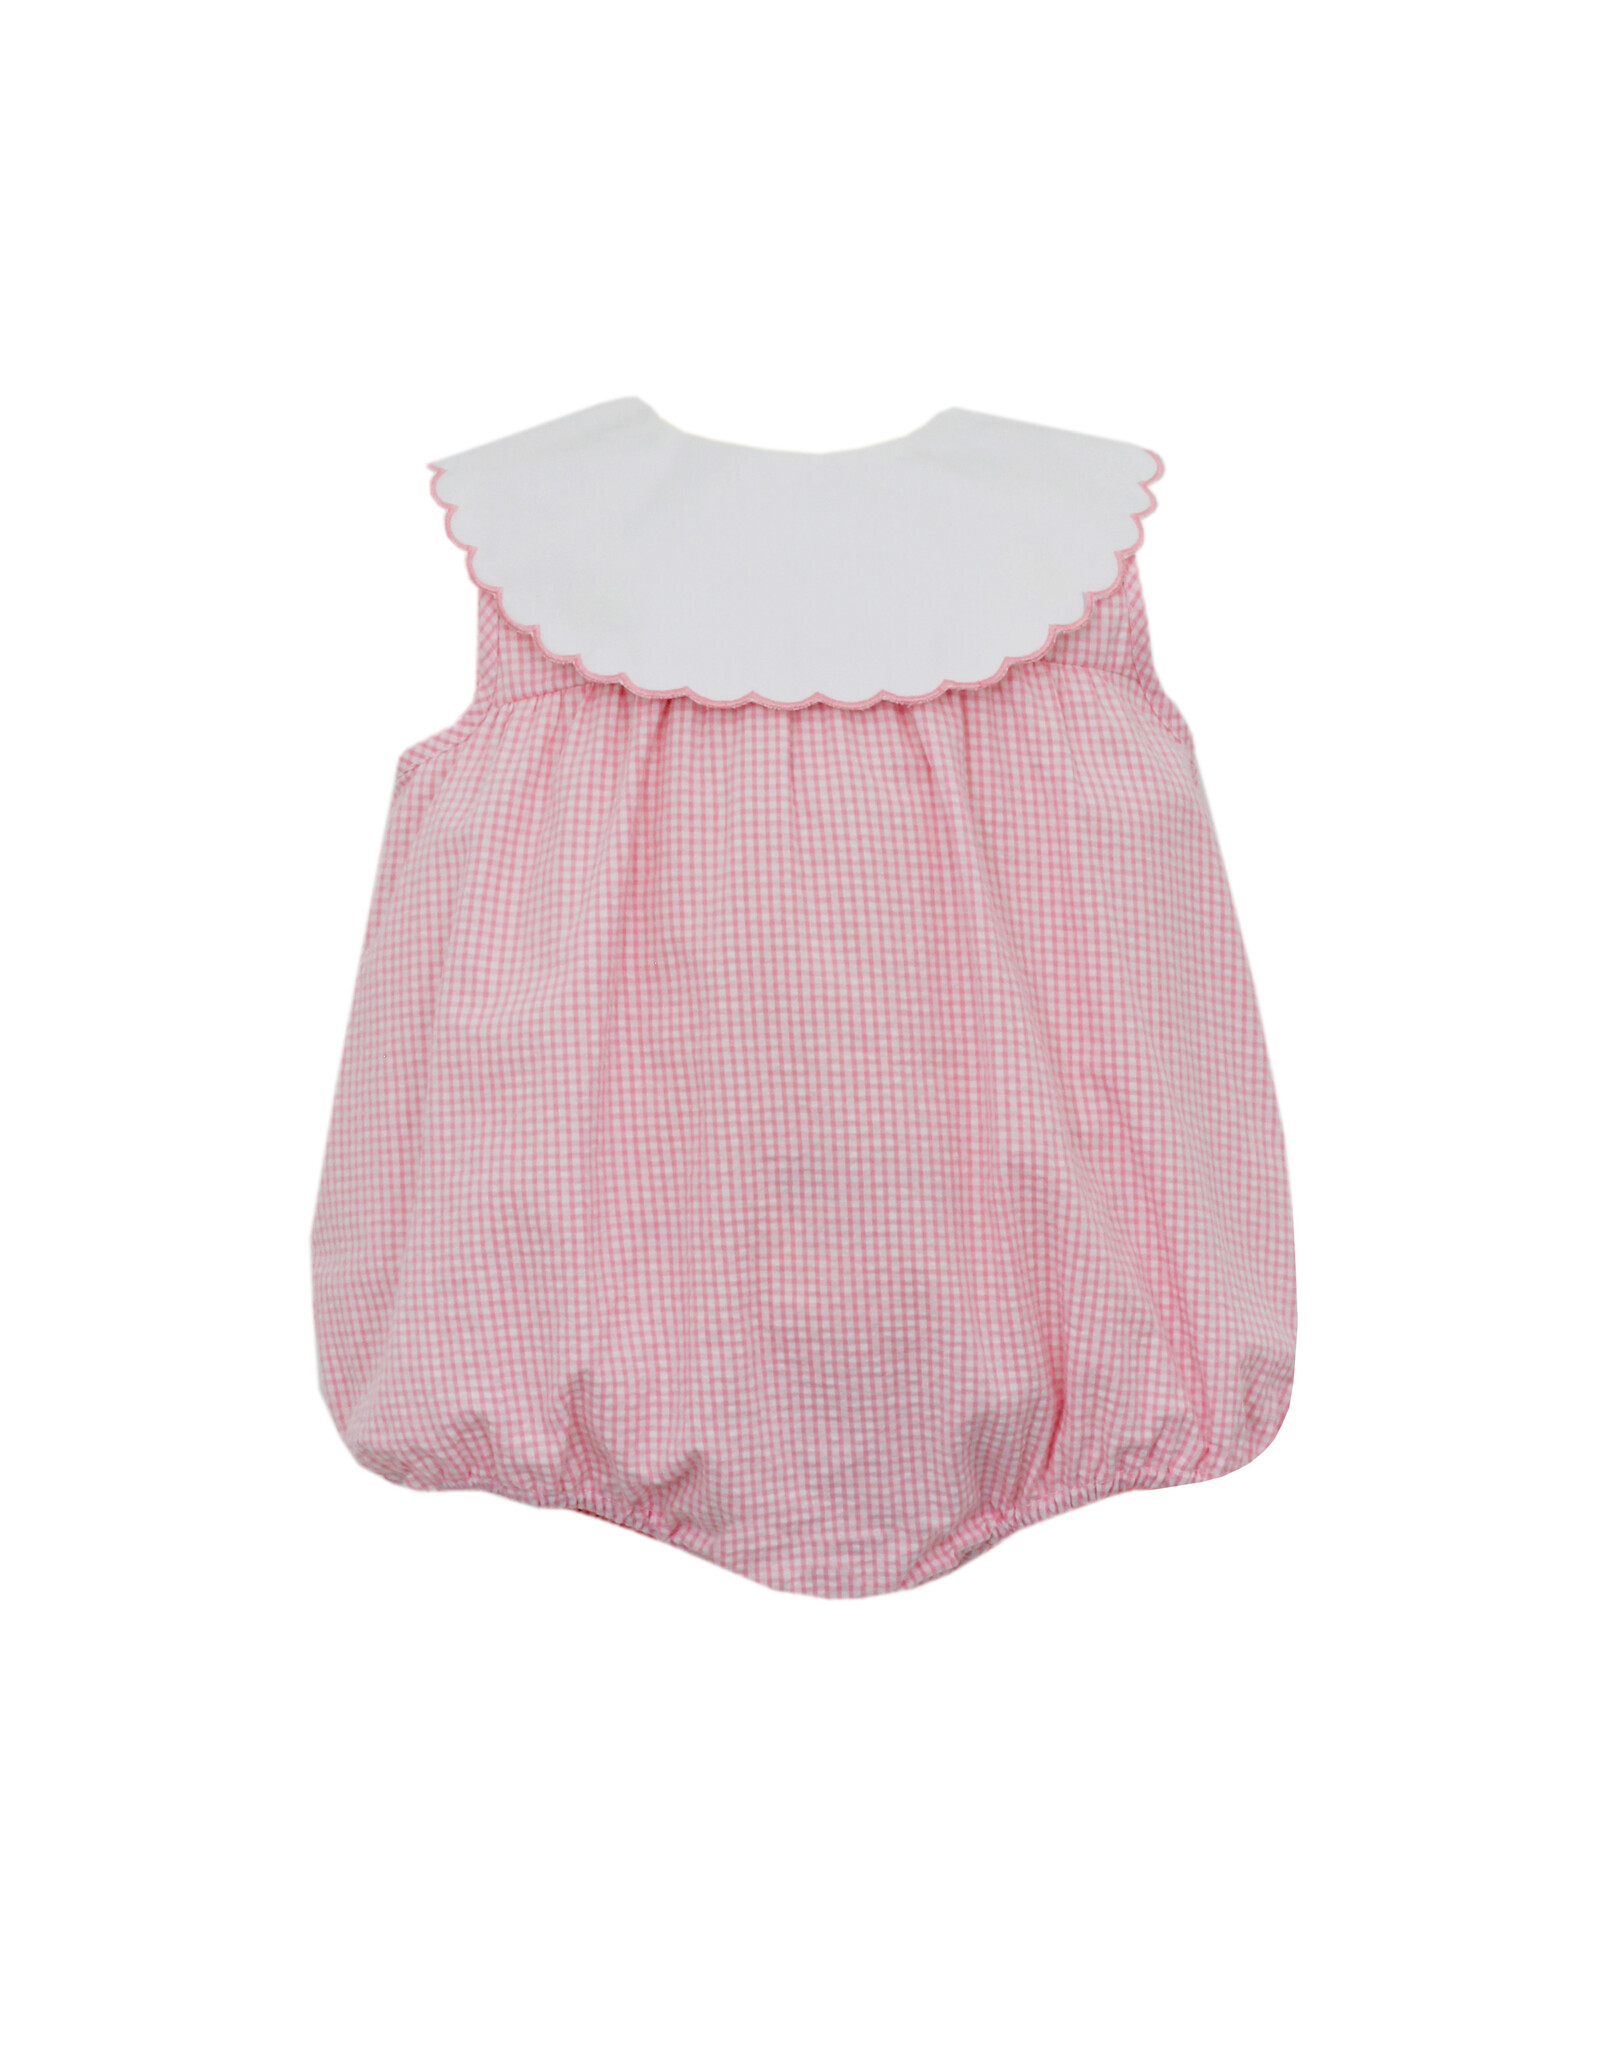 Claire and Charlie Pink Seersucker Gingham Bubble w/ Scalloped Collar